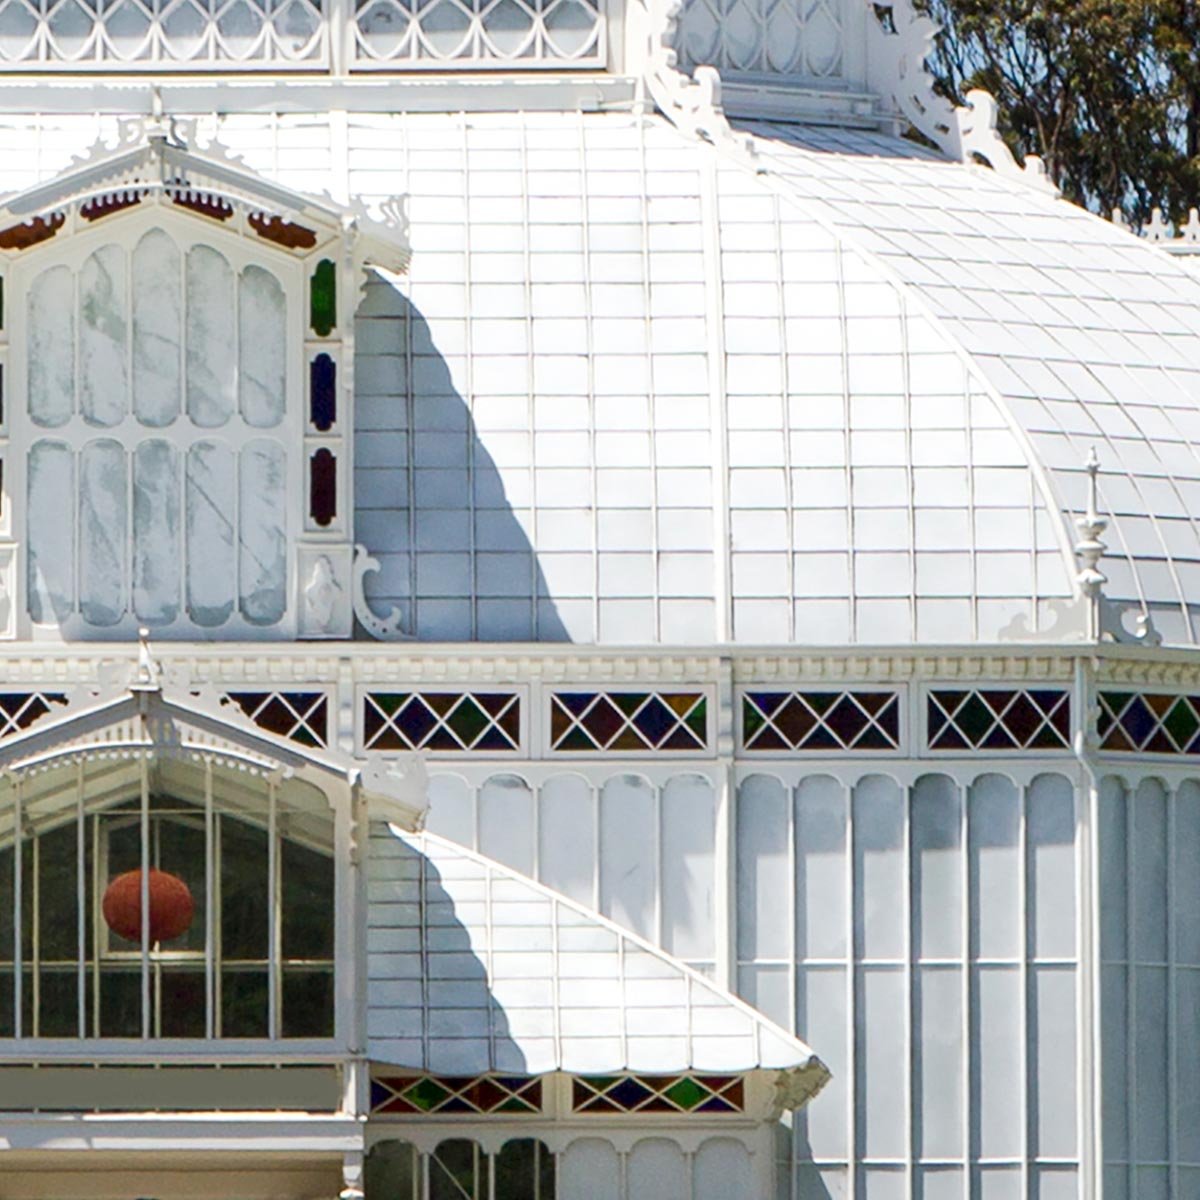 The Conservatory of Flowers, Golden Gate Park, San Francisco by Carol M. Highsmith